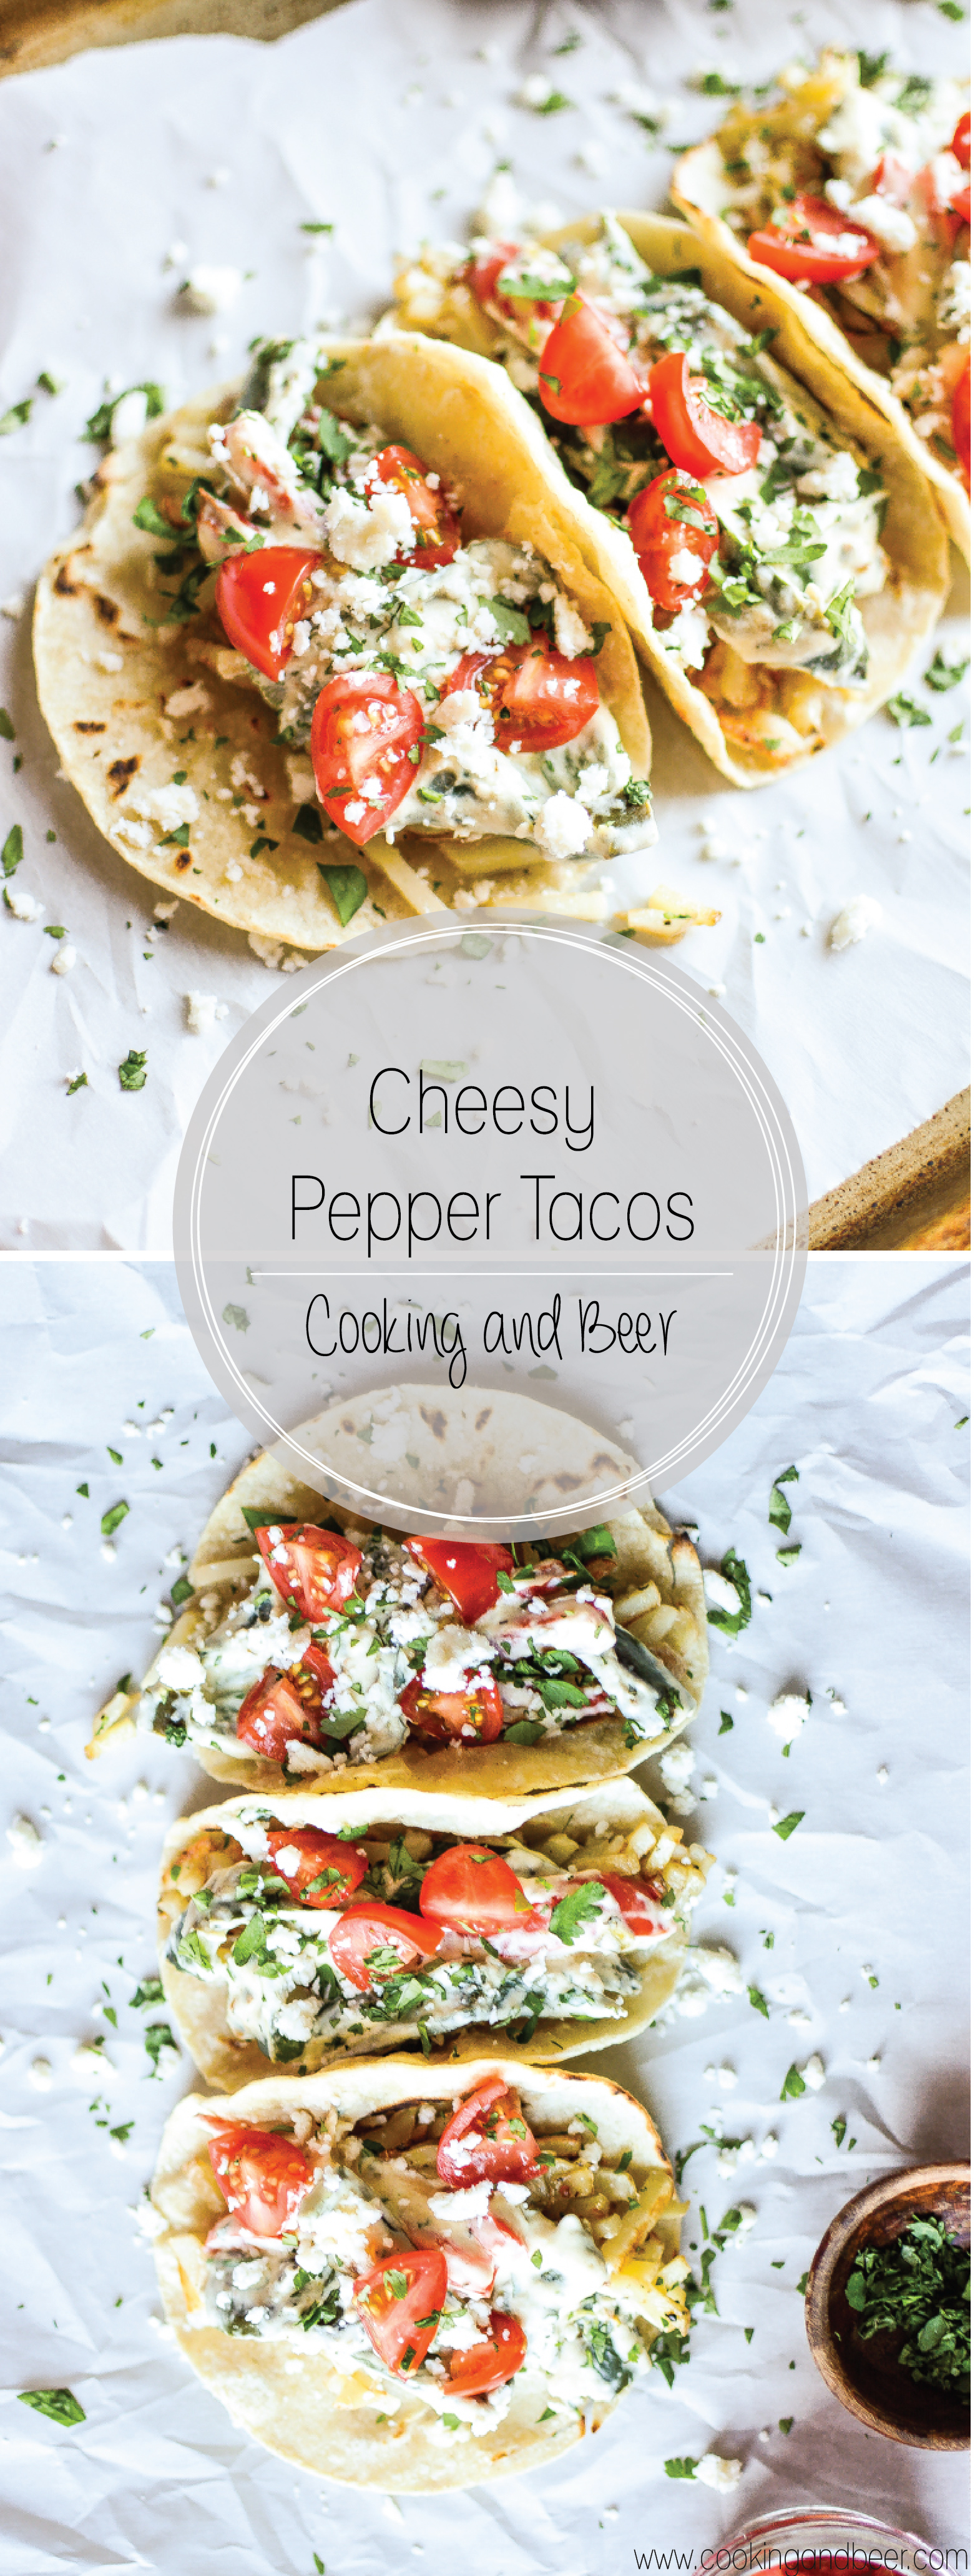 Cheesy Roasted Pepper Tacos recipe for taco Tuesday! A perfect taco dish that's loaded with spice and flavor, yet also vegetarian! | www.cookingandbeer.com